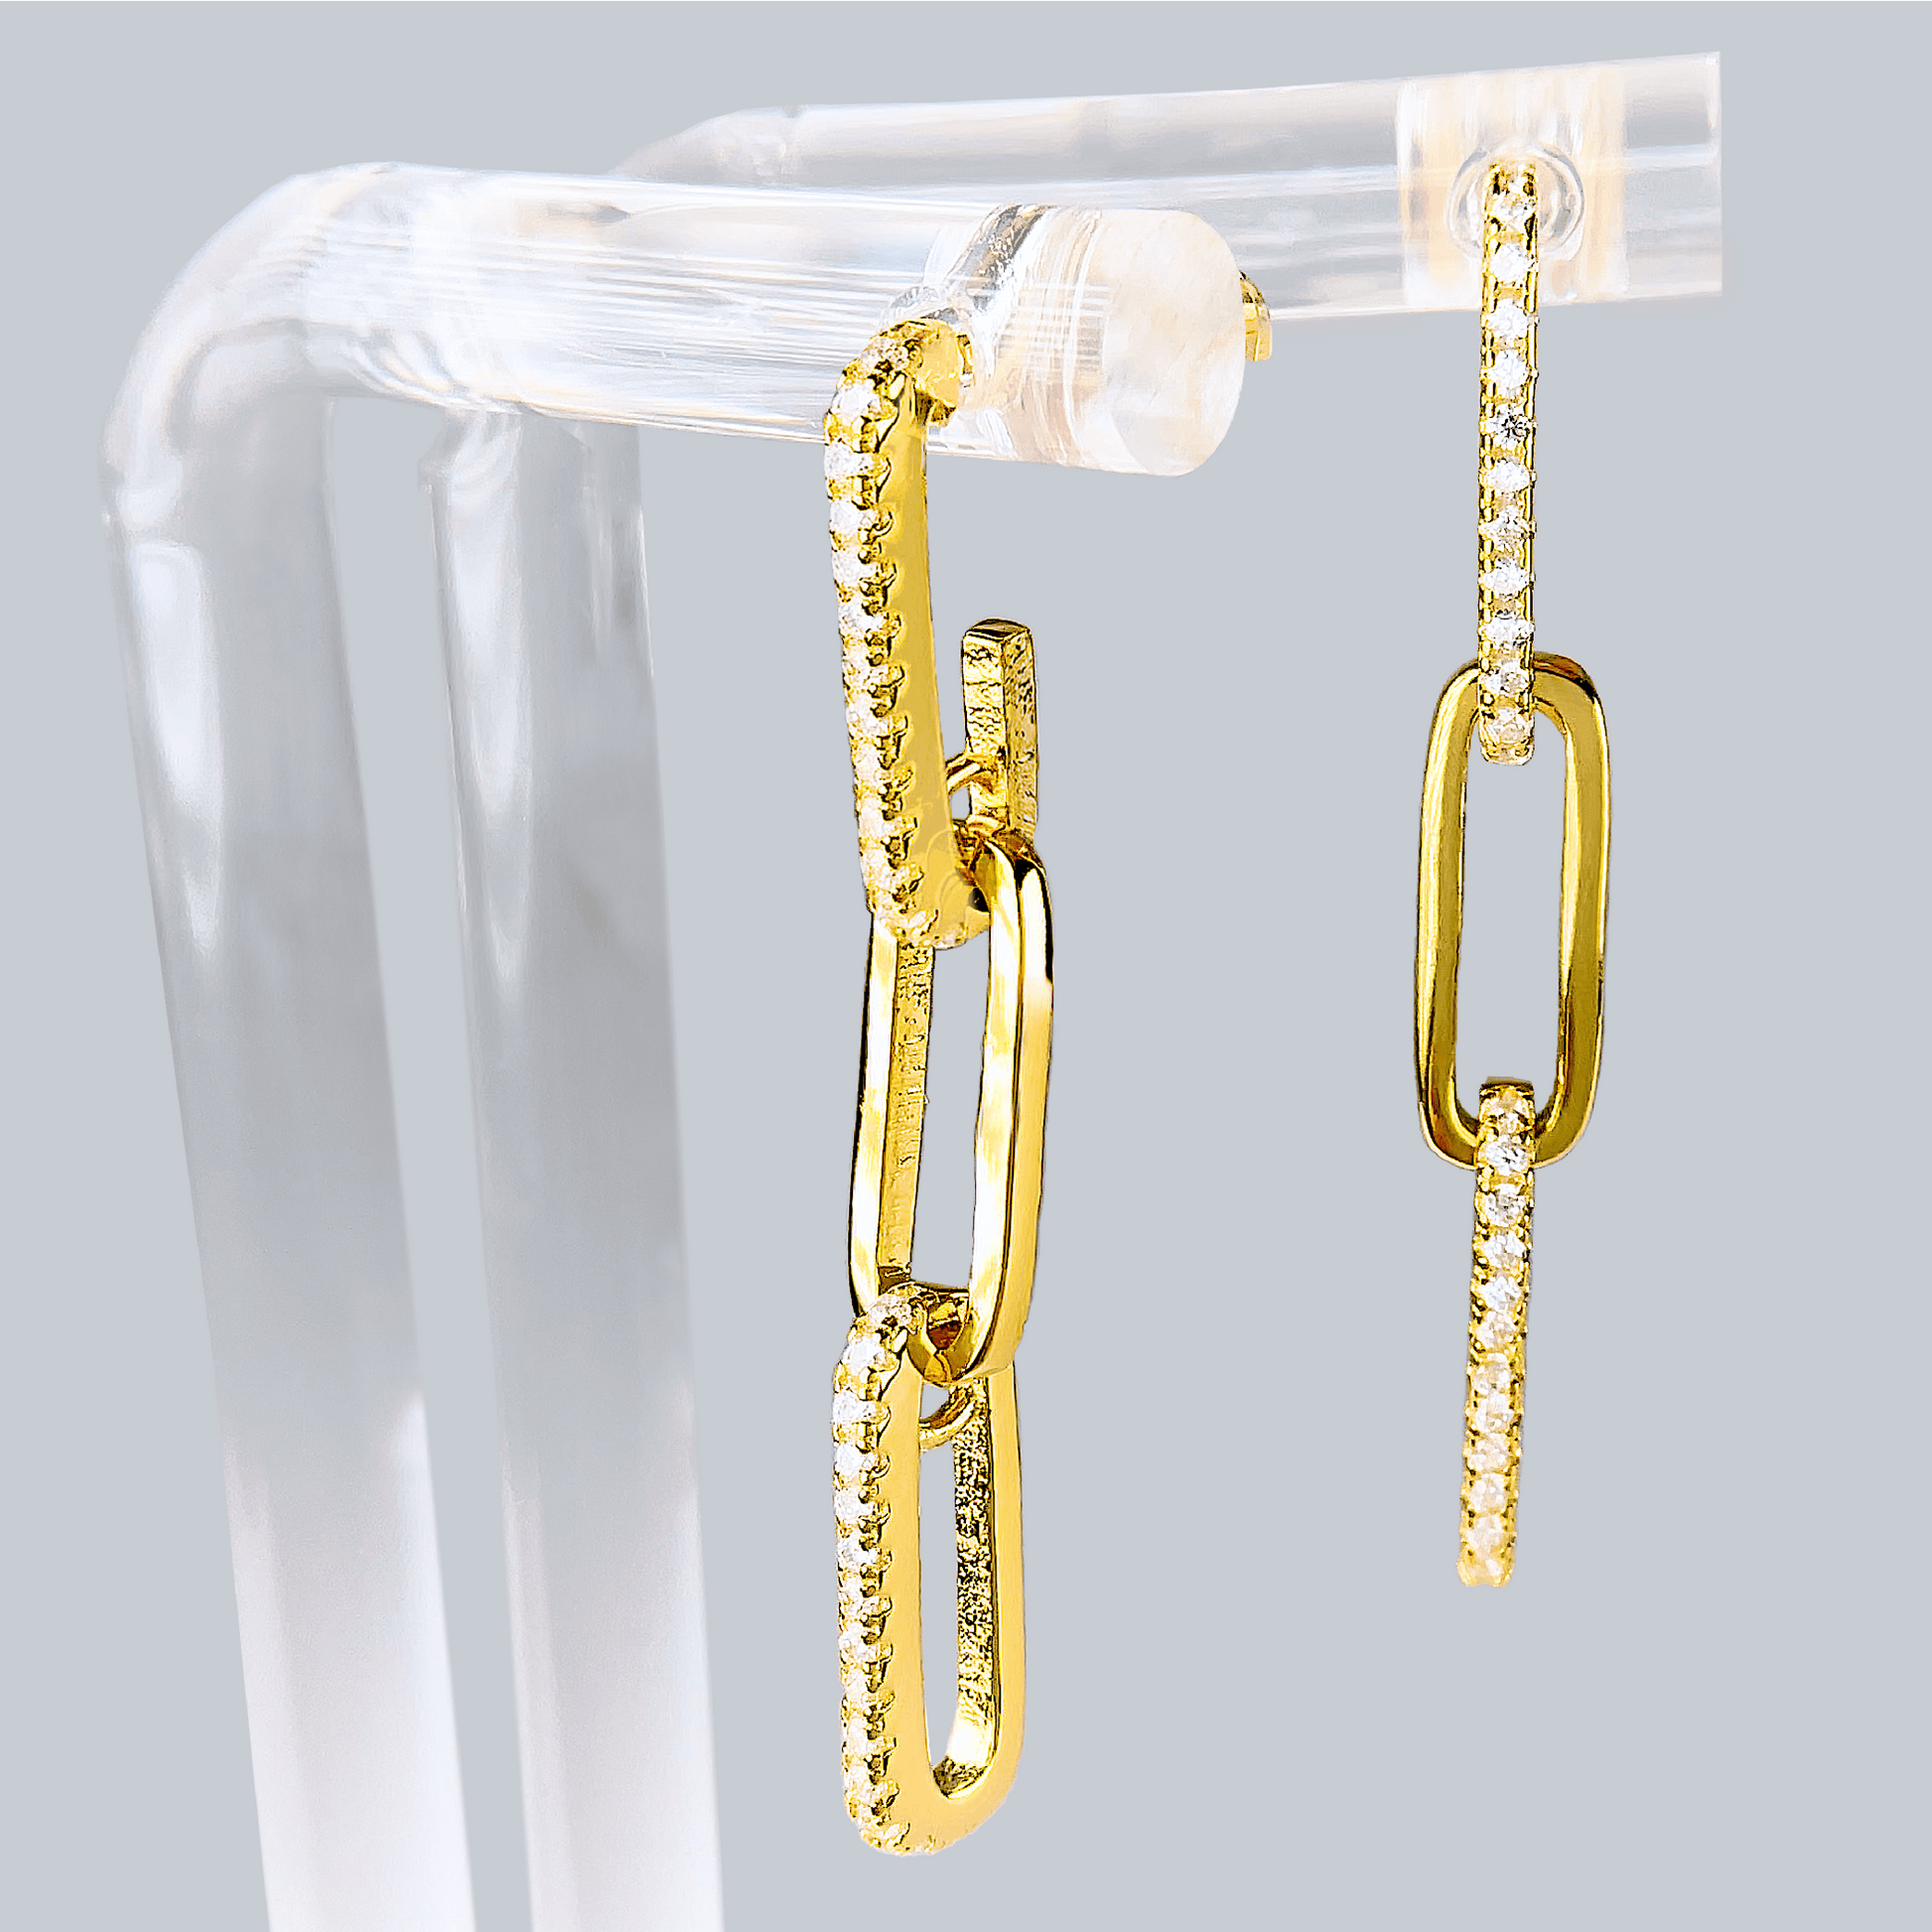 Spirits Unearth 18k Gold Plated Paperclip Zirconia Earrings